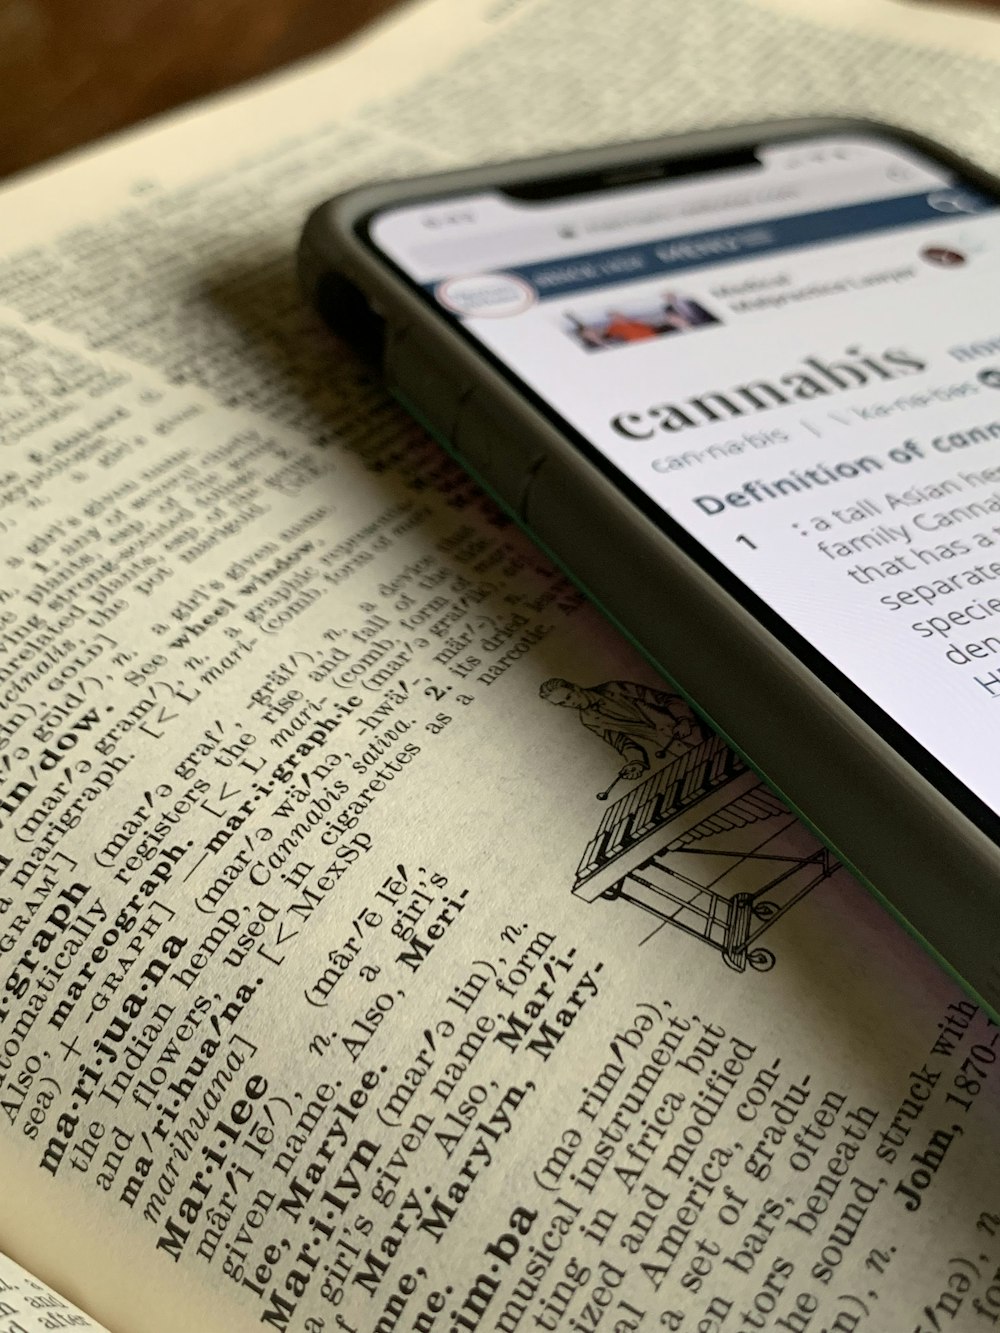 silver iPhone X displaying cannabis definition on top of dictionary